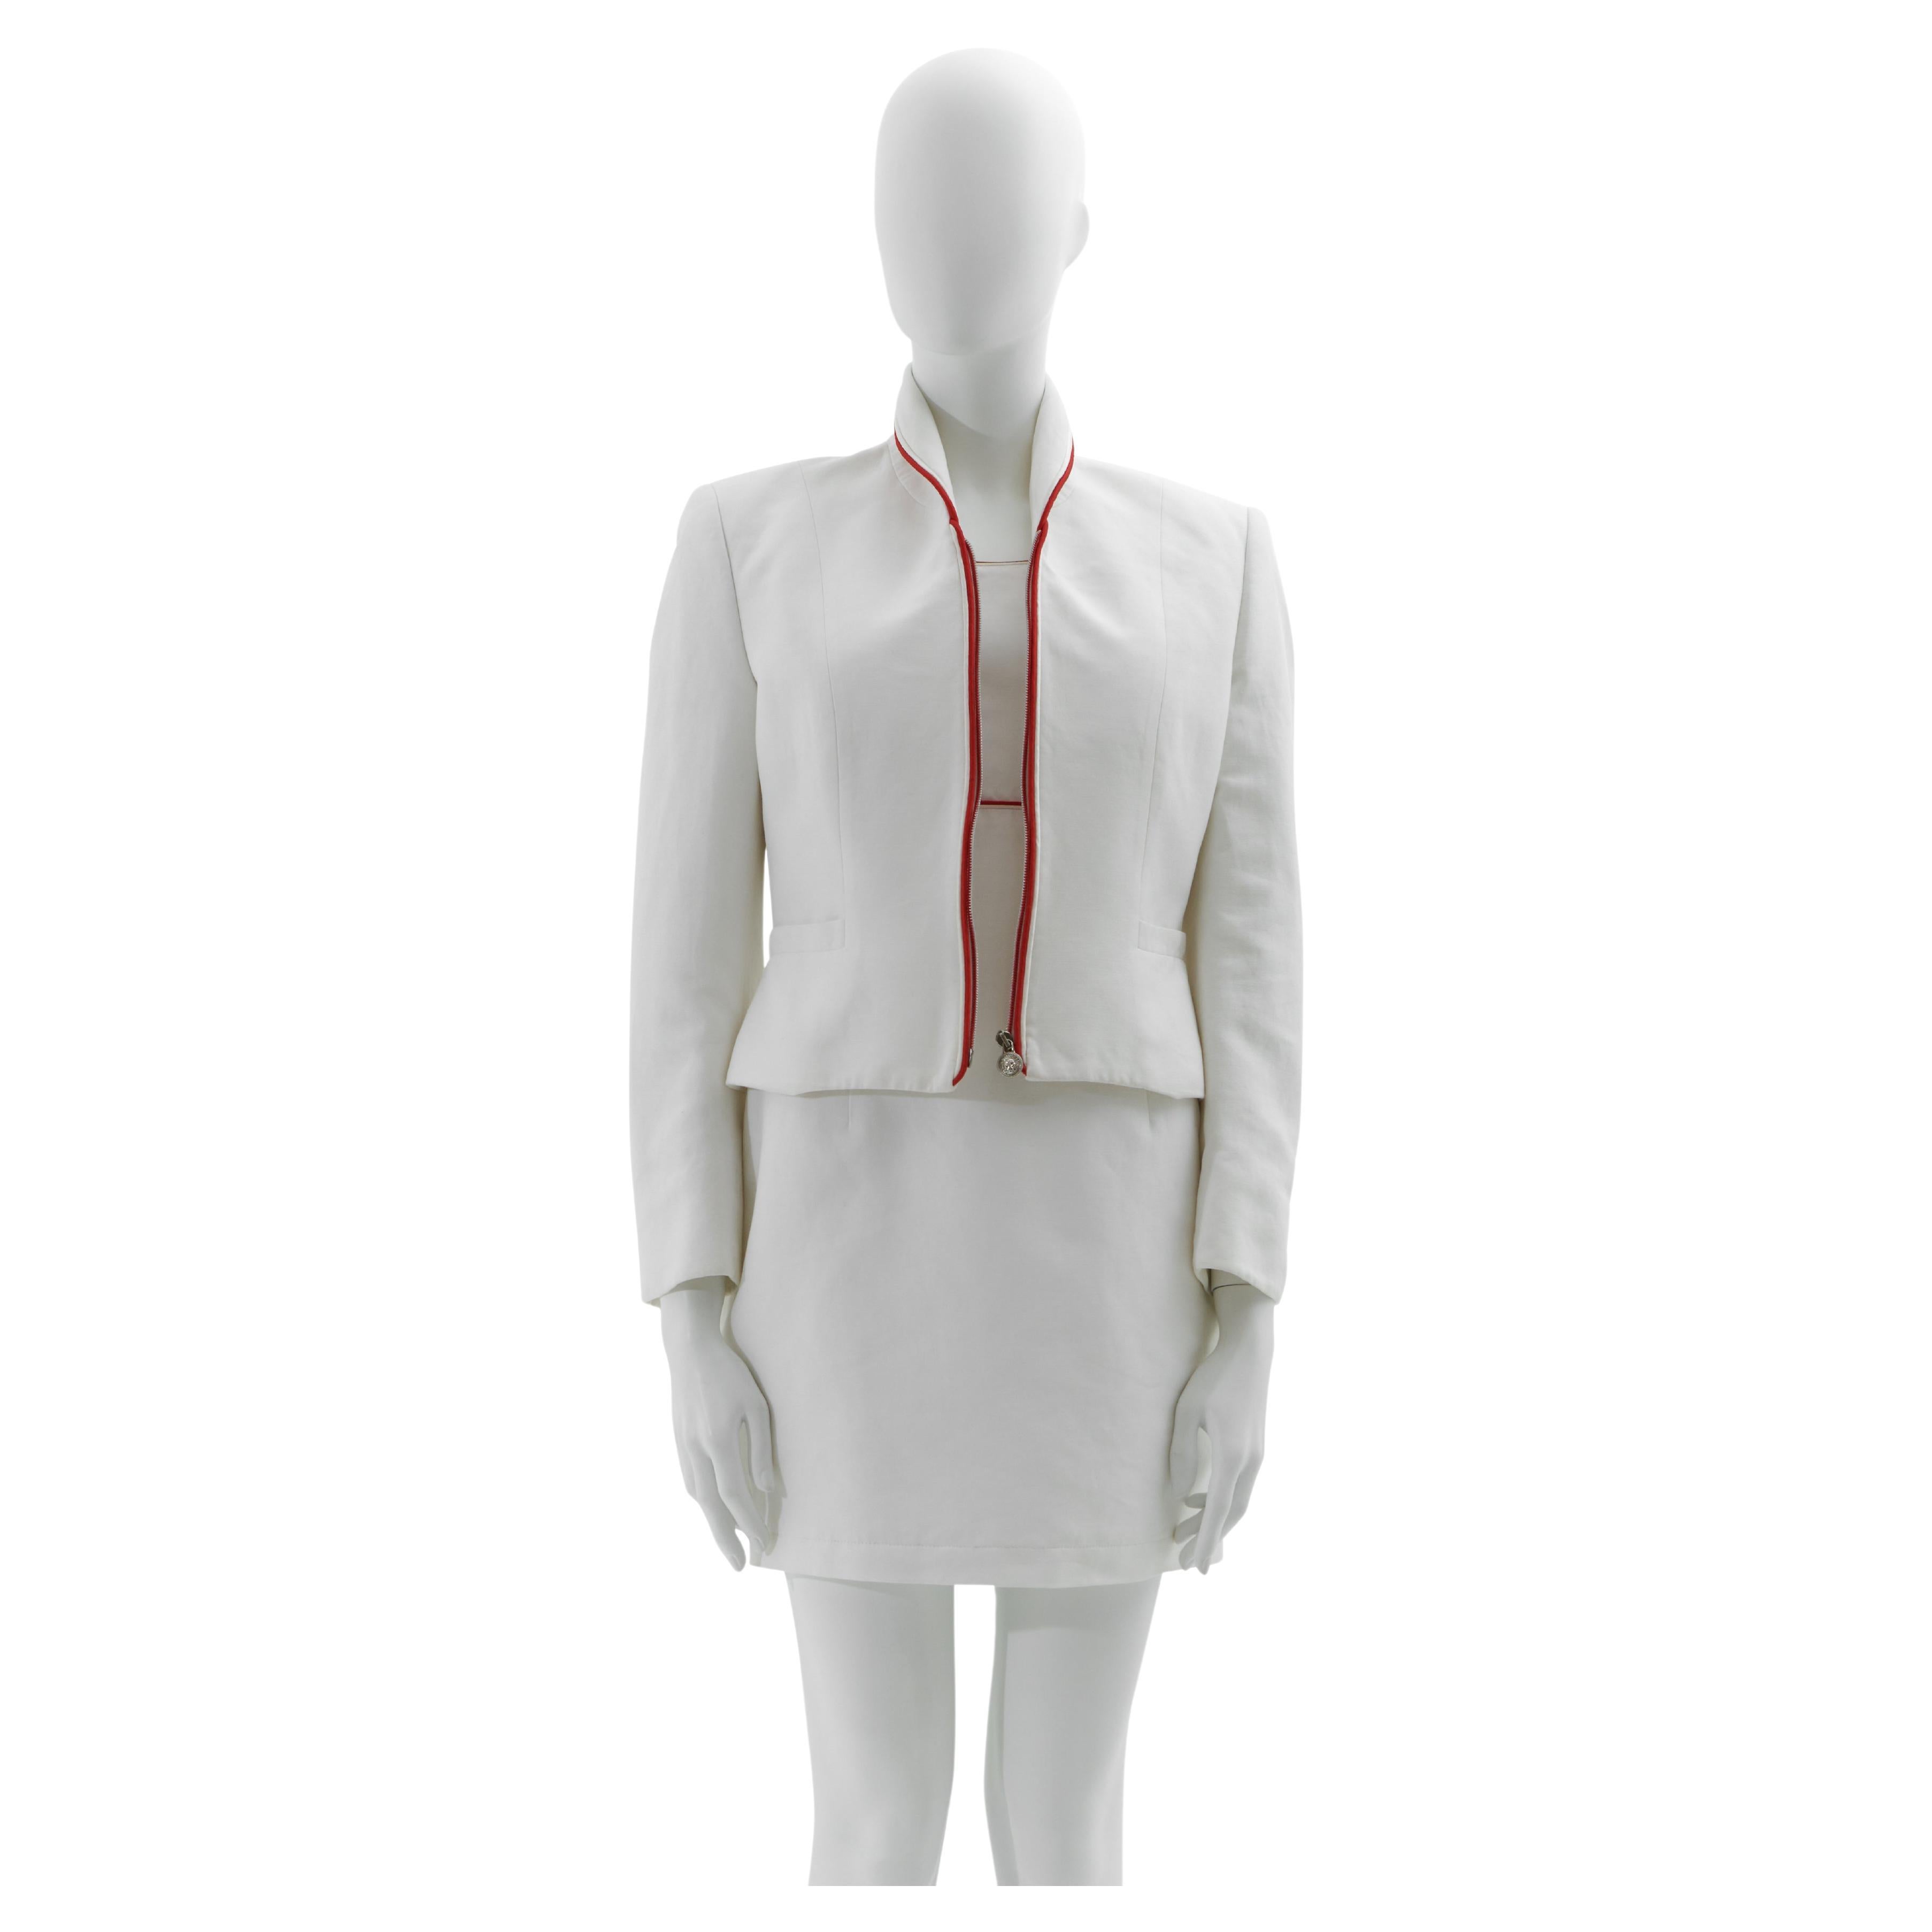 Versus by Gianni Versace Early 1990s White cotton dress and crop jacket set For Sale